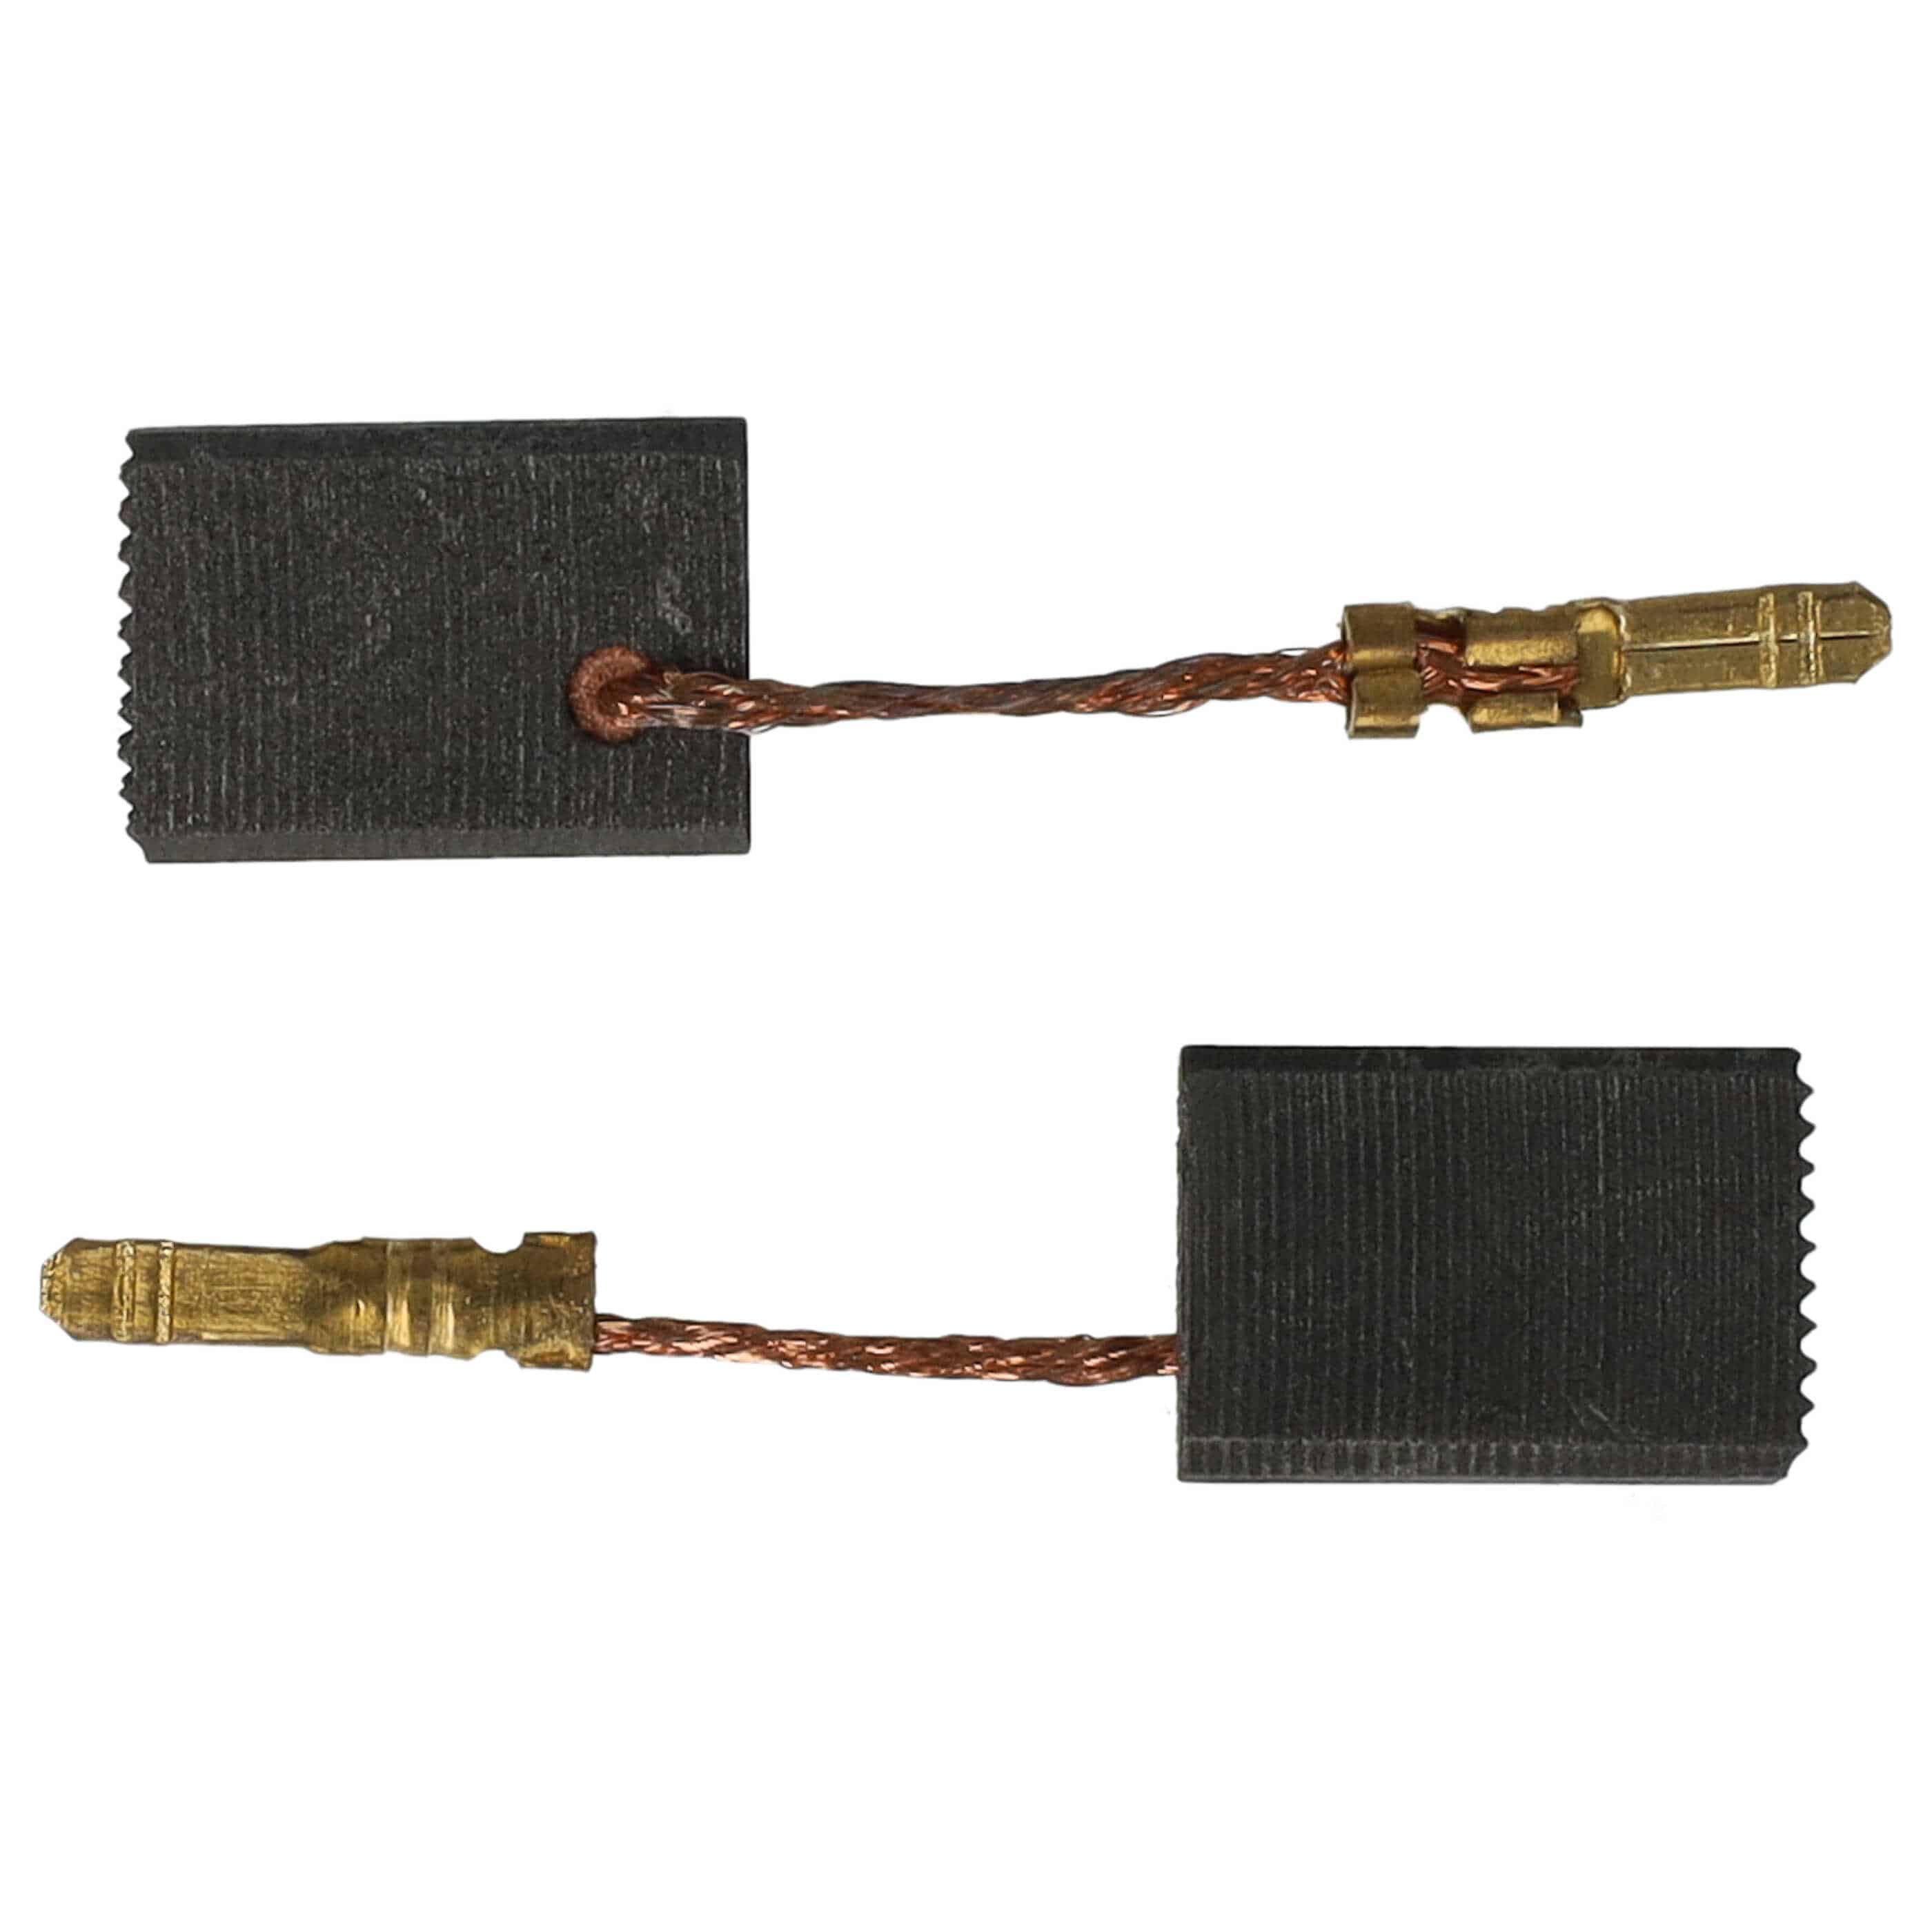 2x Carbon Brush as Replacement for Fein 30711157000 Electric Power Tools, 16 x 11 x 5mm